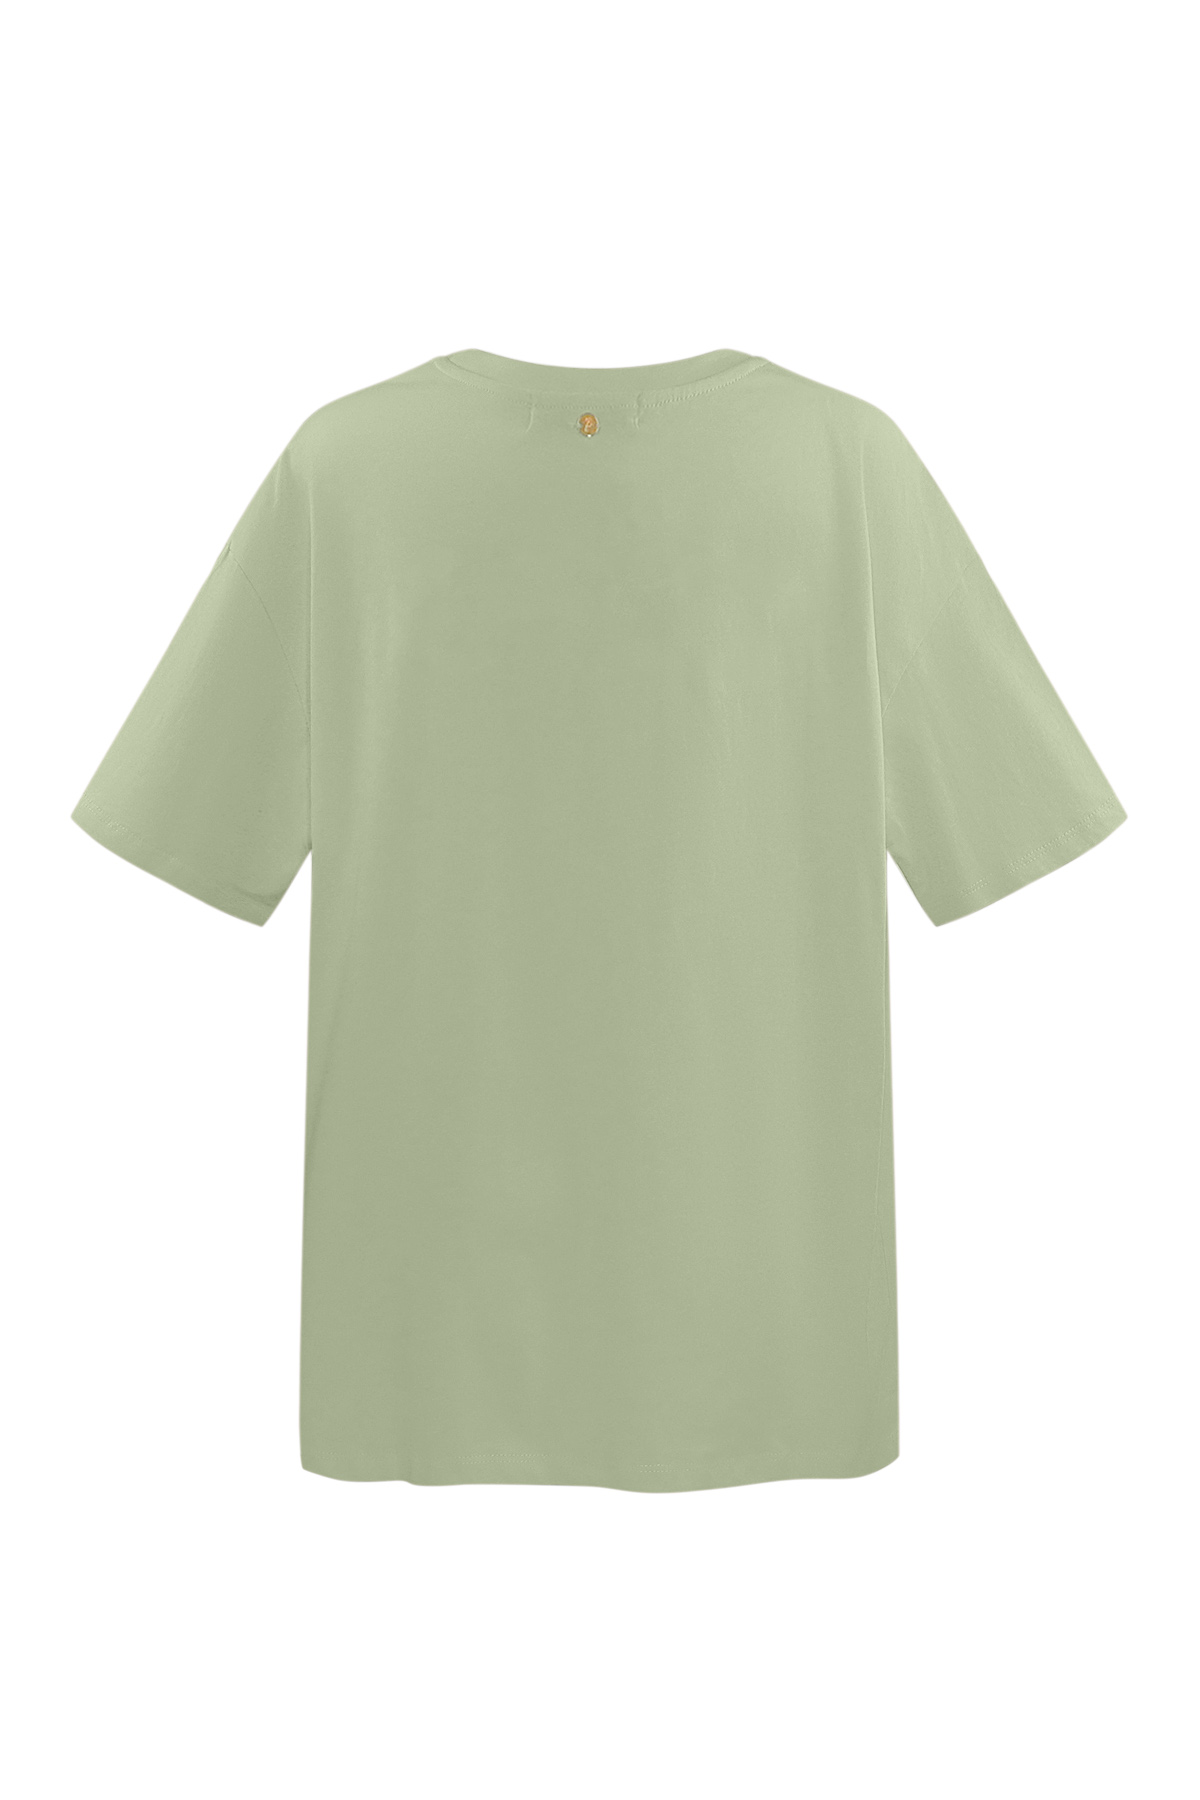 T-shirt ma perle - green Picture7